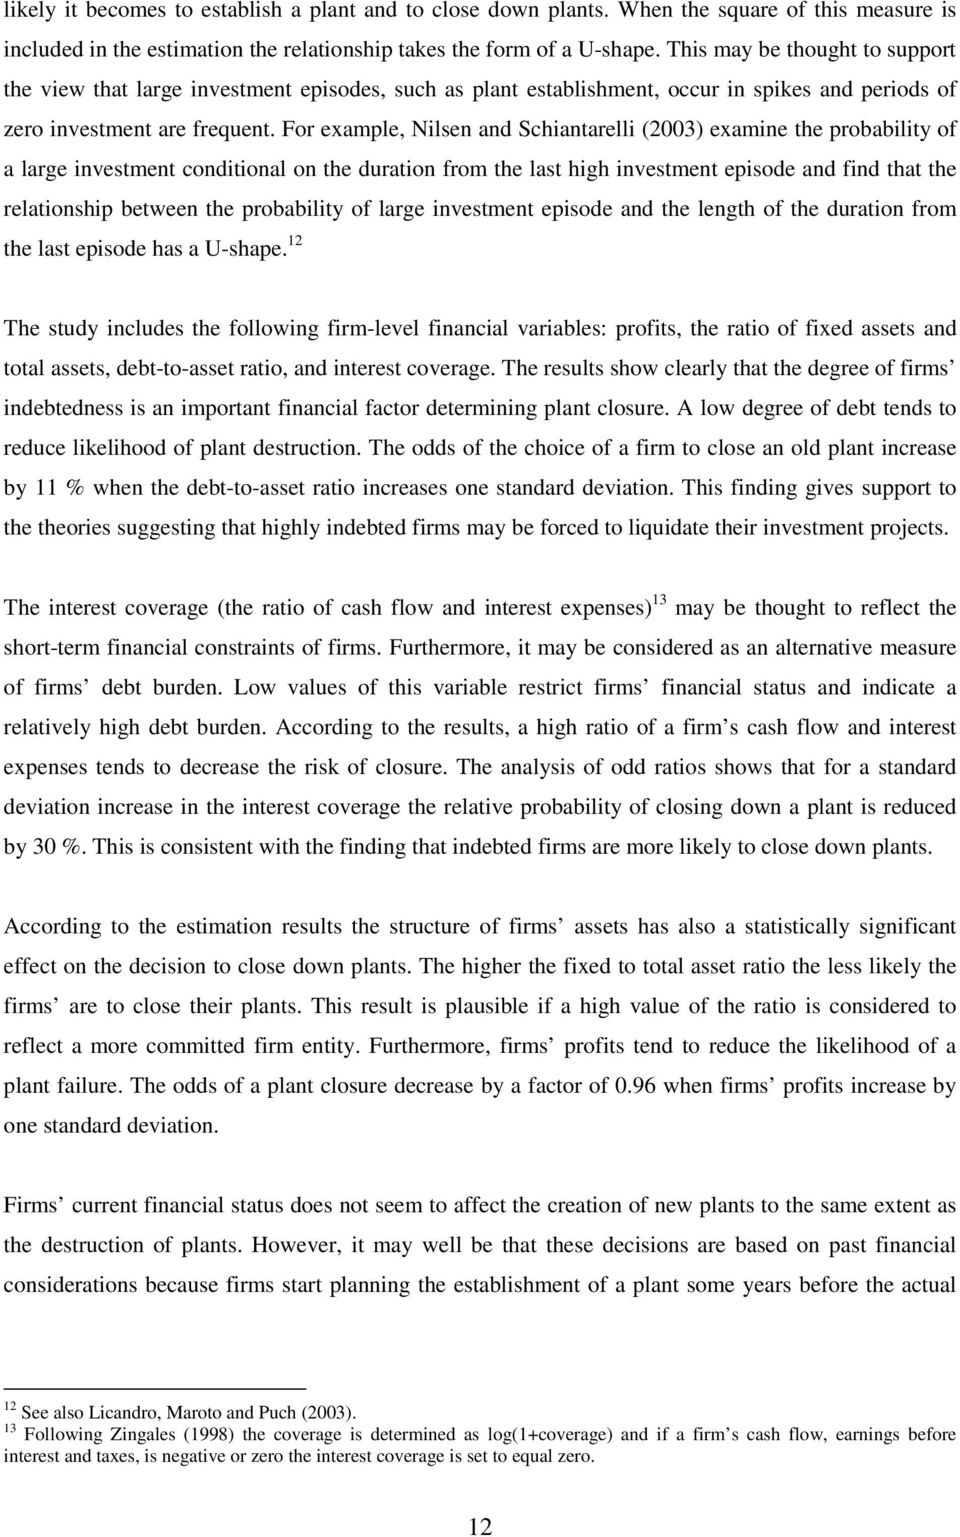 For example, Nilsen and Schiantarelli (200) examine the probability of a large investment conditional on the duration from the last high investment episode and find that the relationship between the